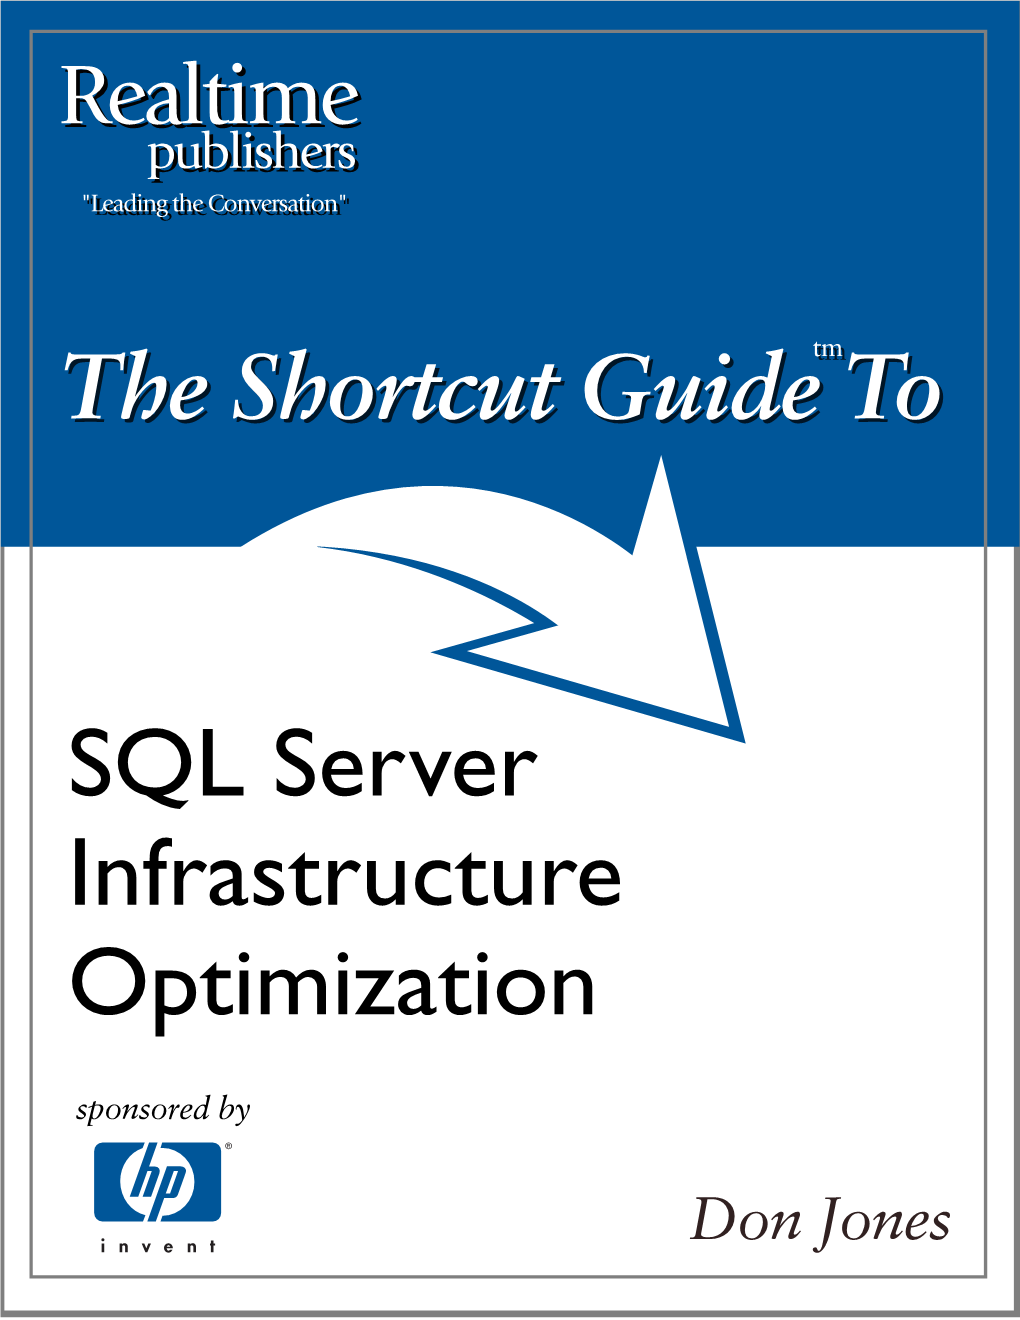 The Shortcut Guide to SQL Server Infrastructure Optimization